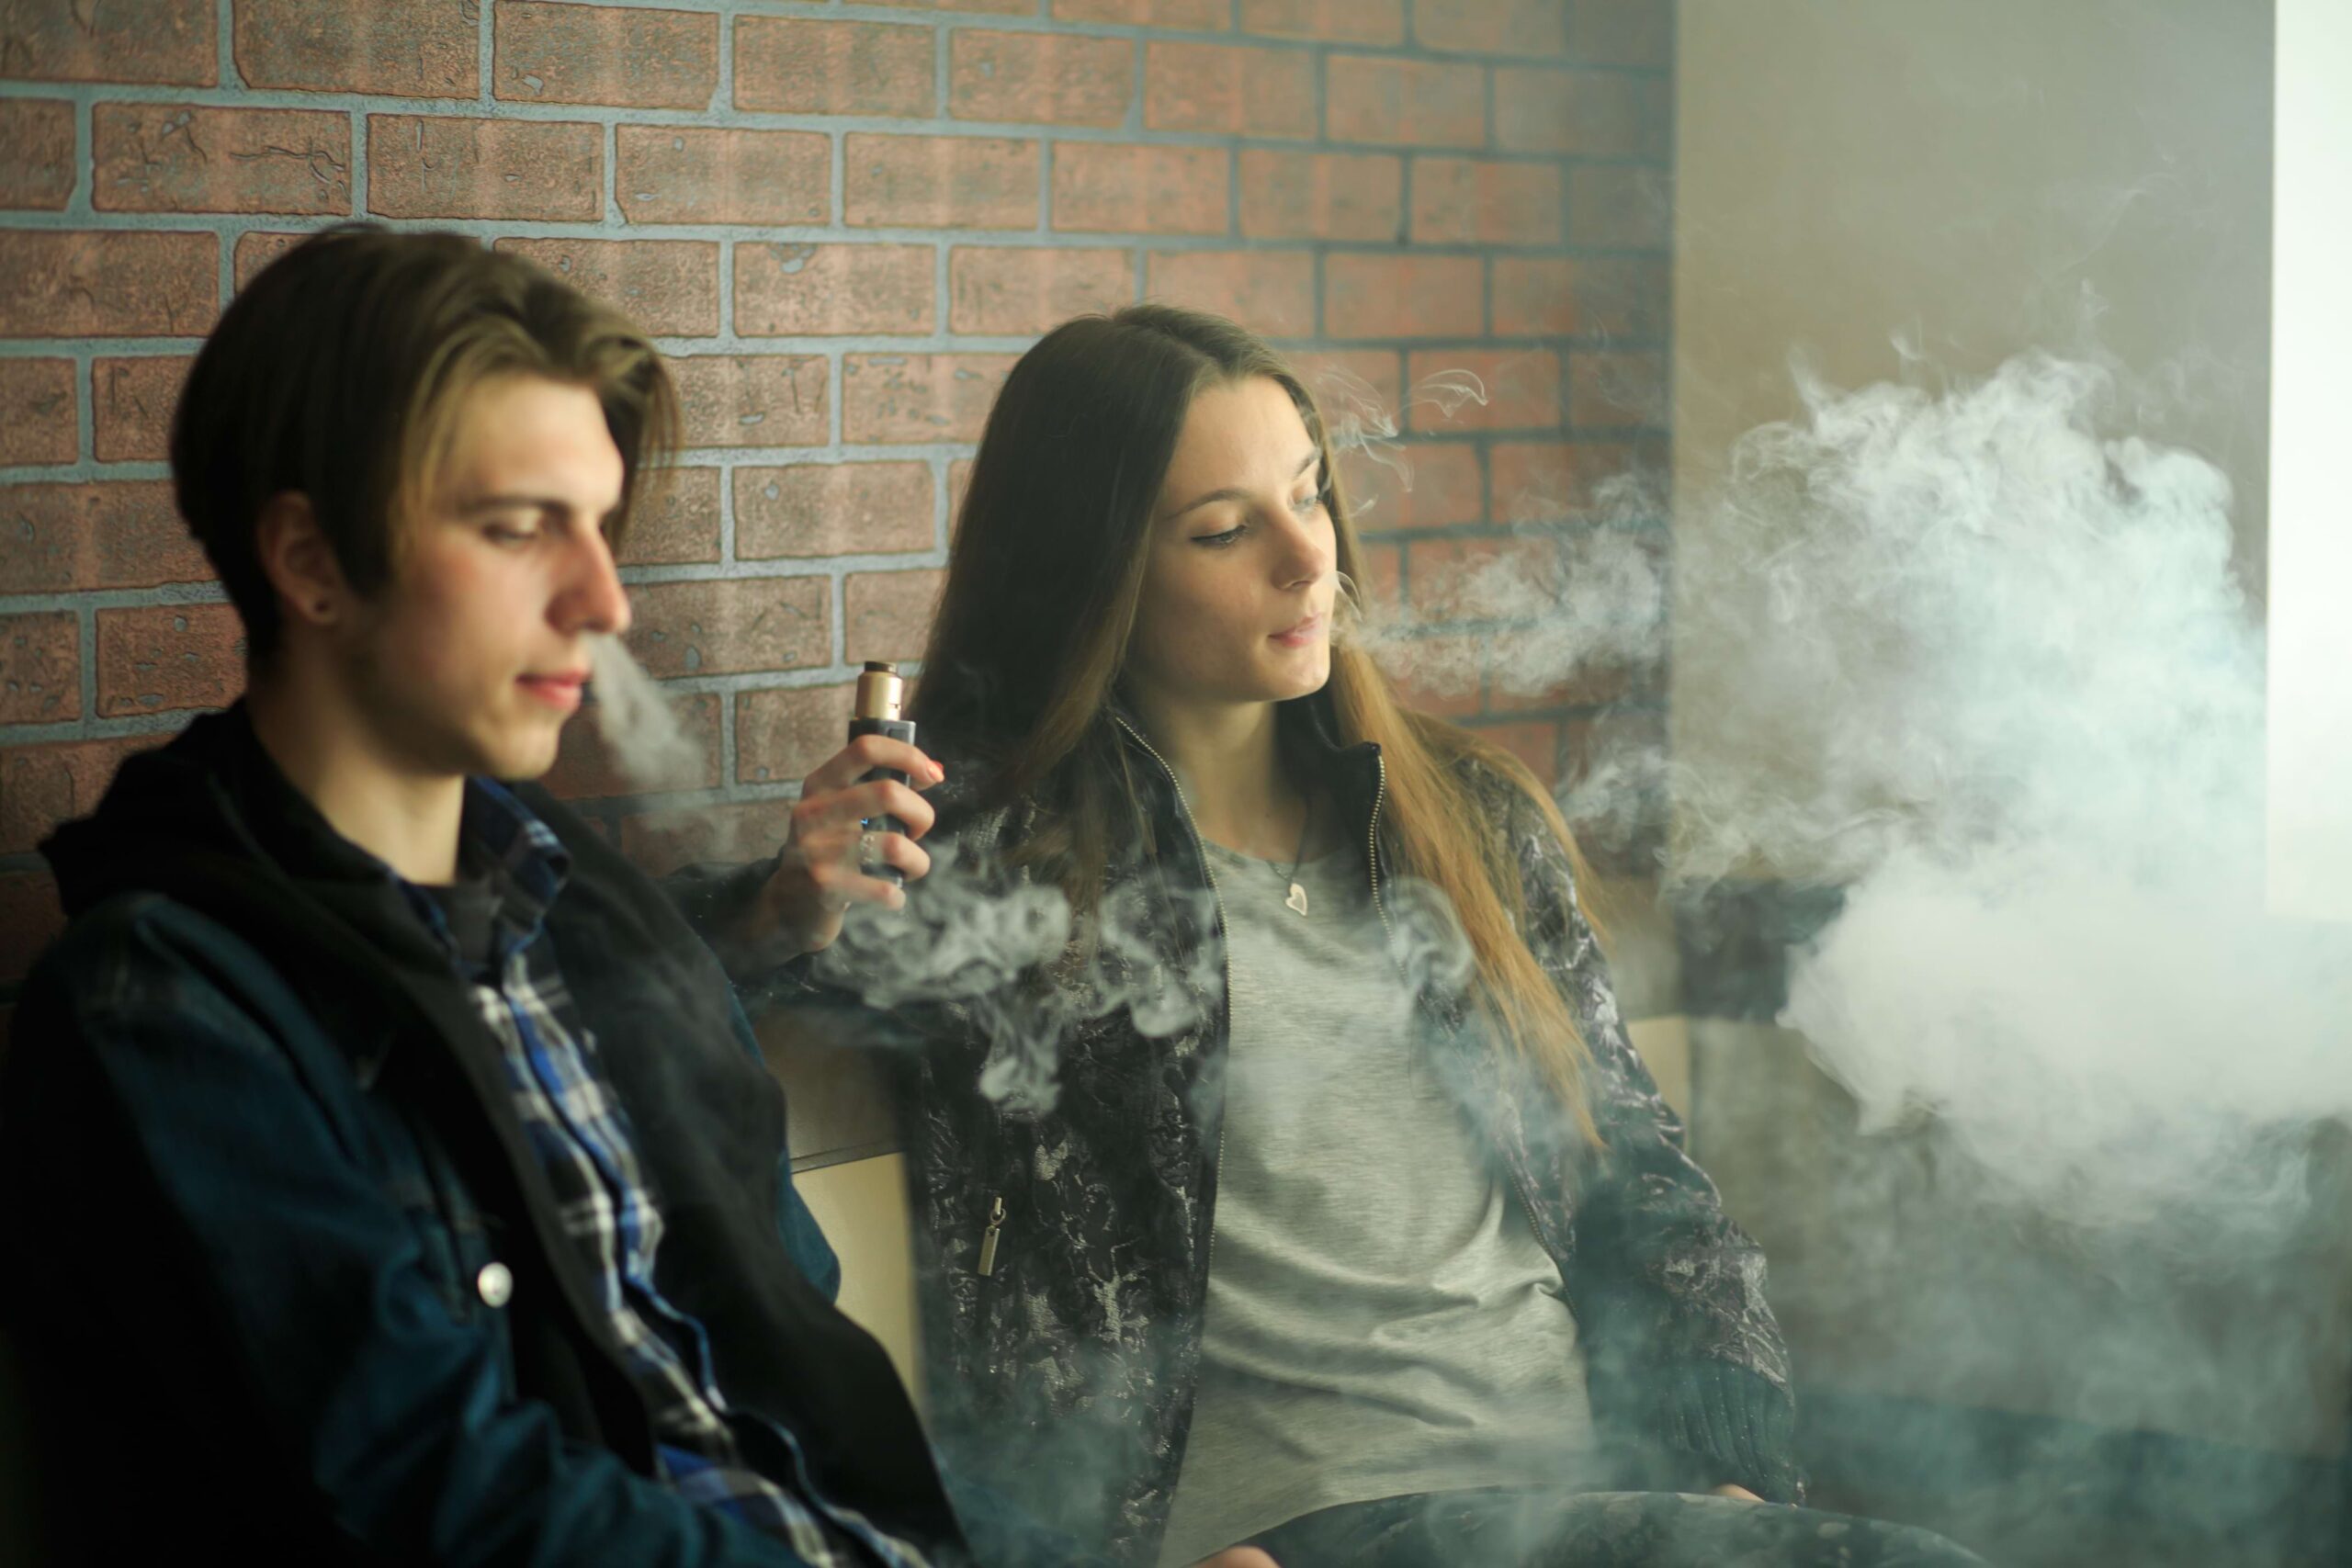 Students Vaping Remains a Key Issue for Schools